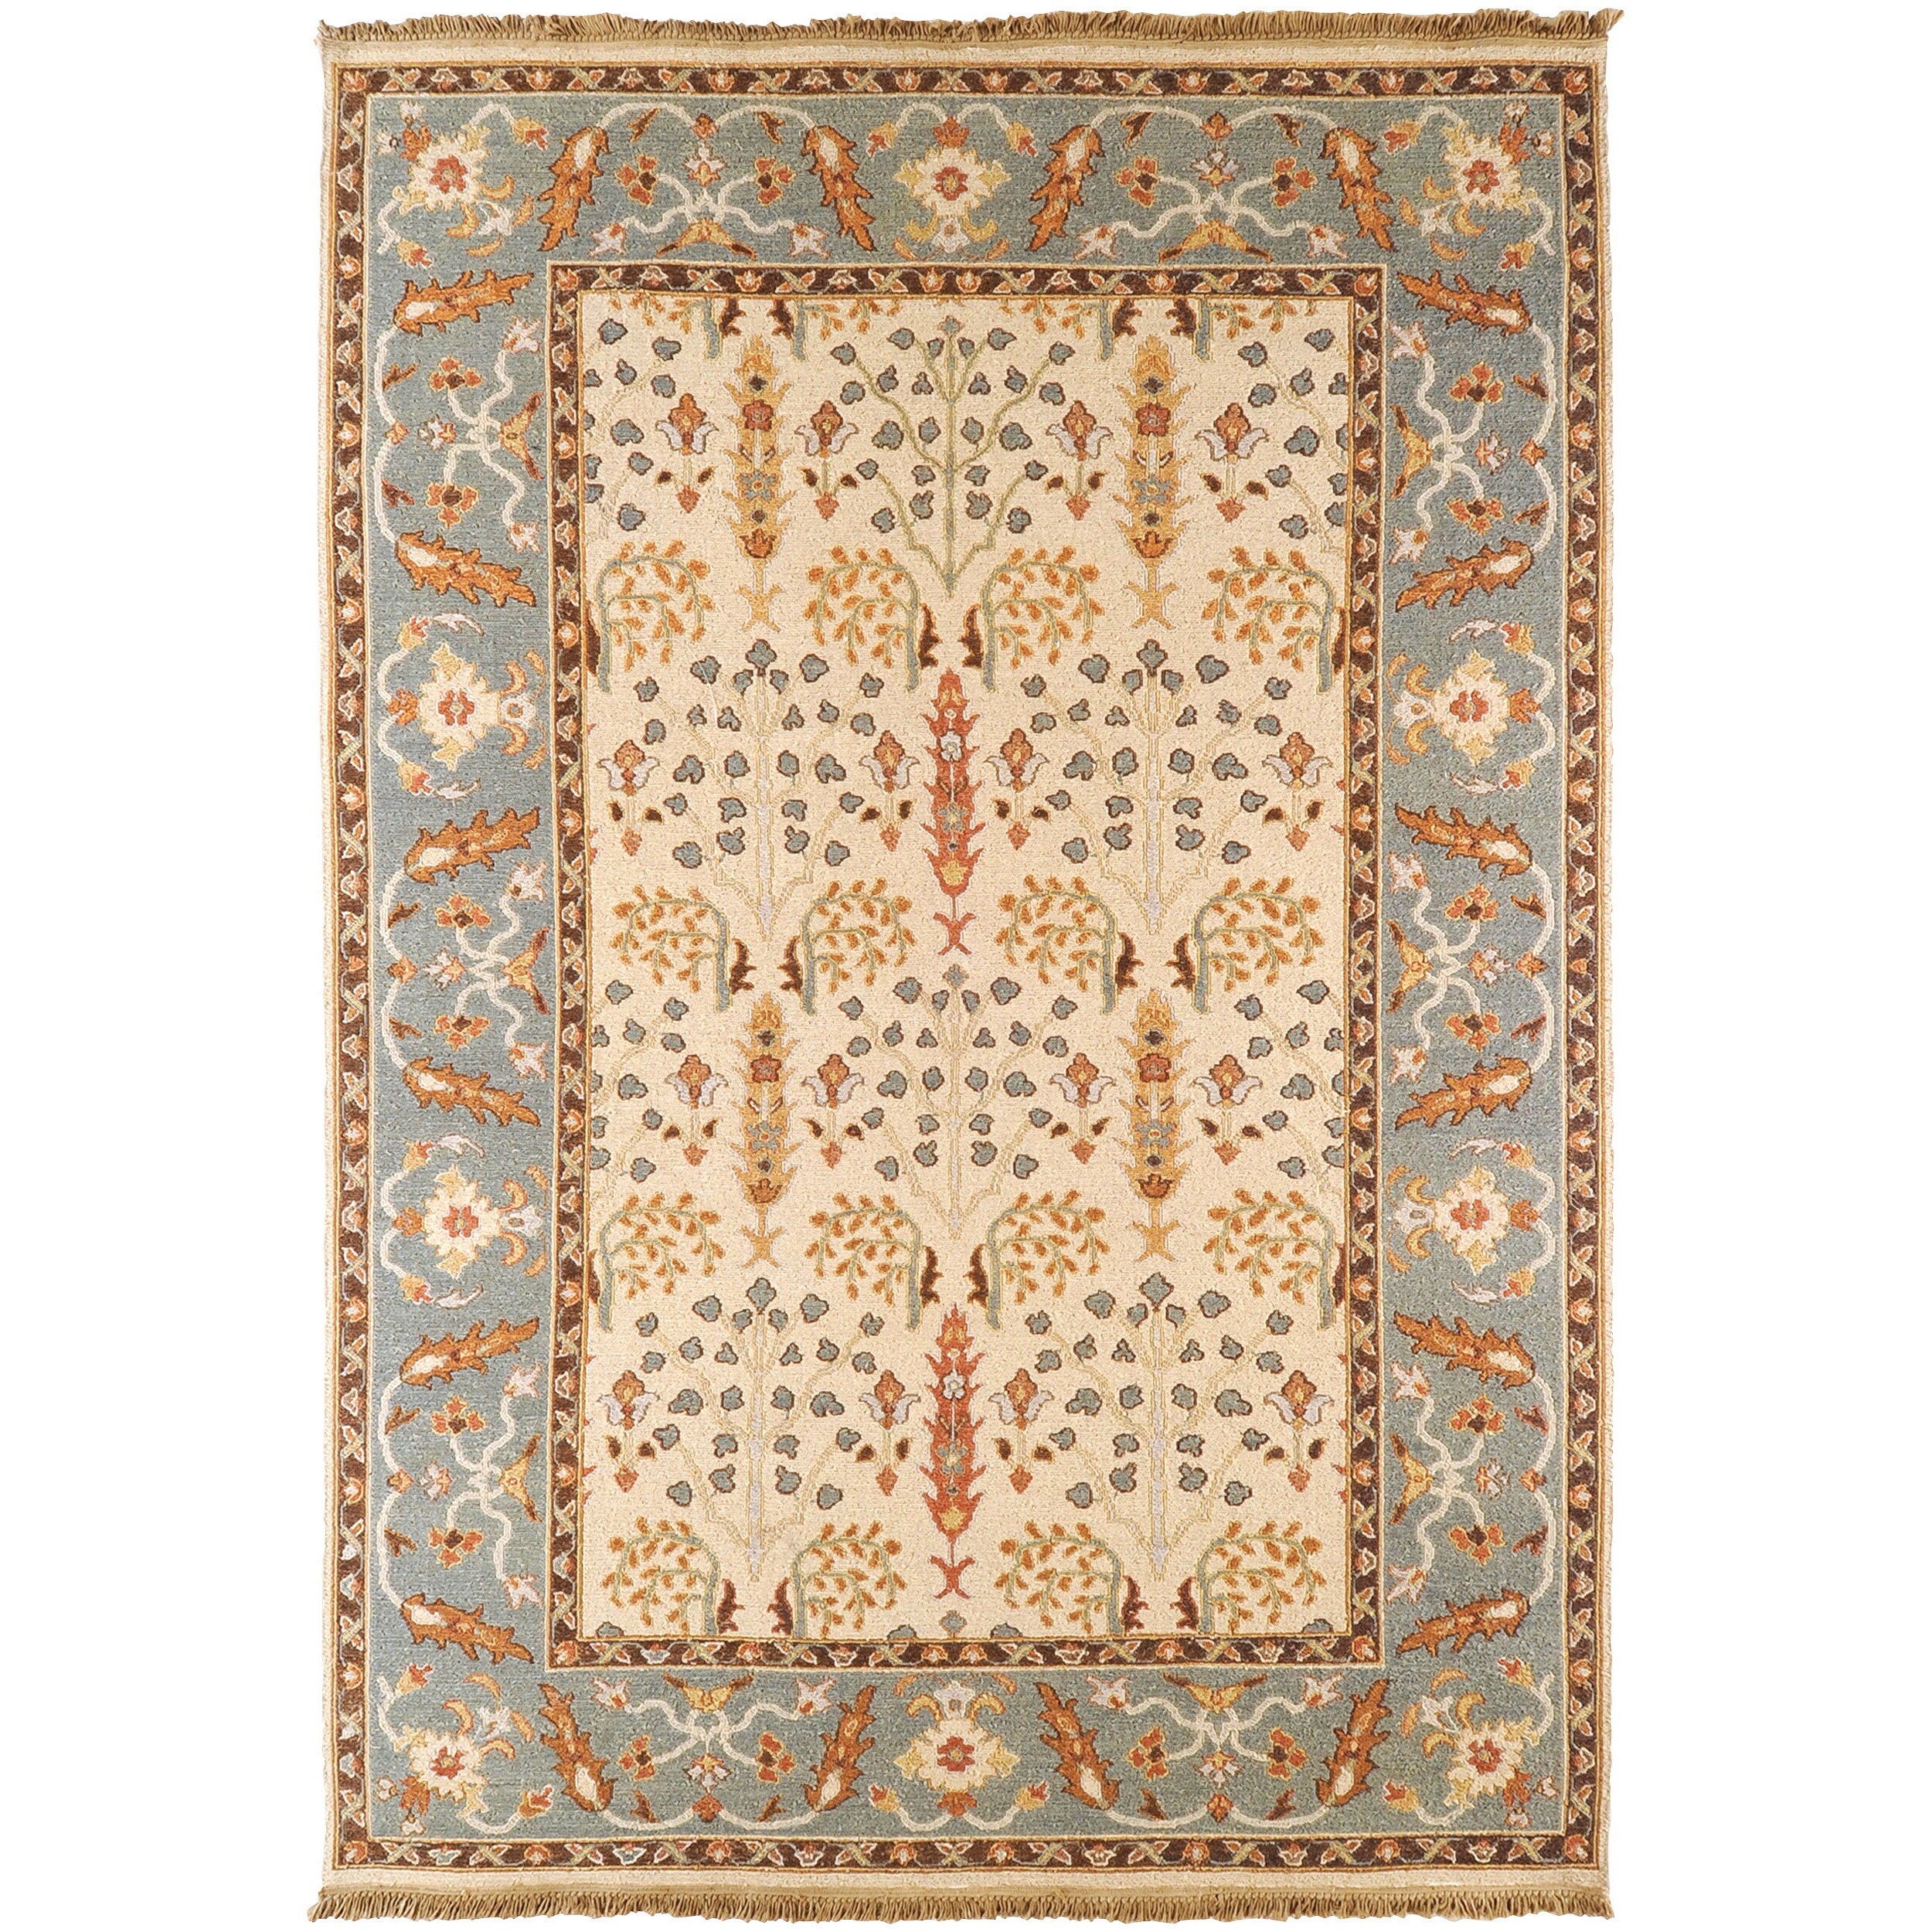 Hand knotted Buckhaven Beige/multi colored Traditional Border New Zealand Wool Rug (8 X 10)